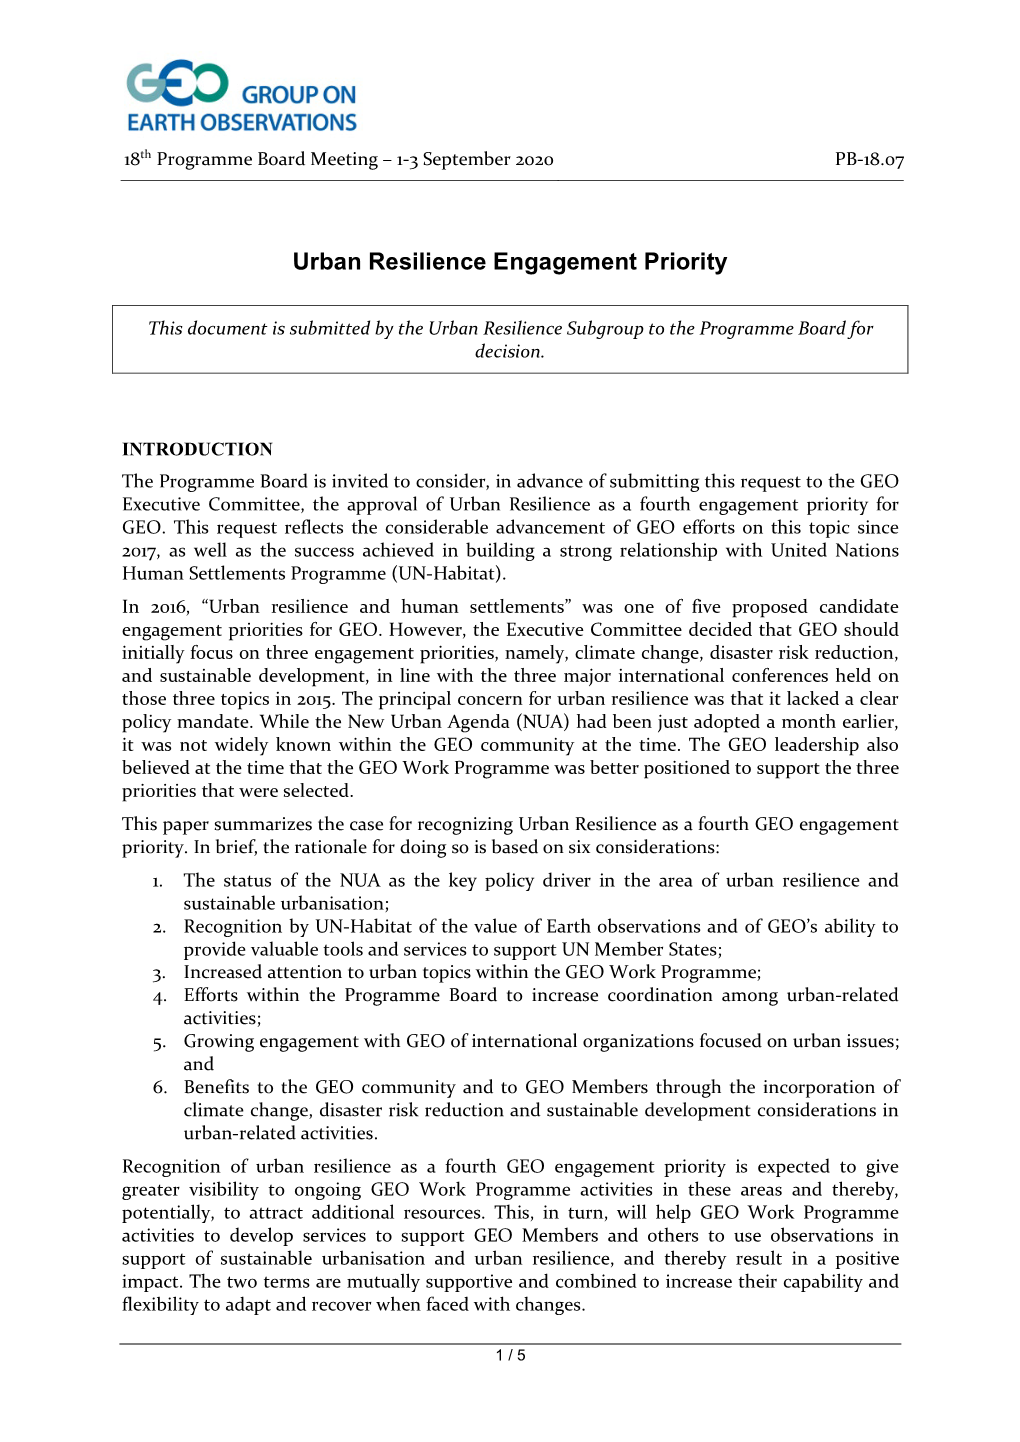 Urban Resilience Engagement Priority